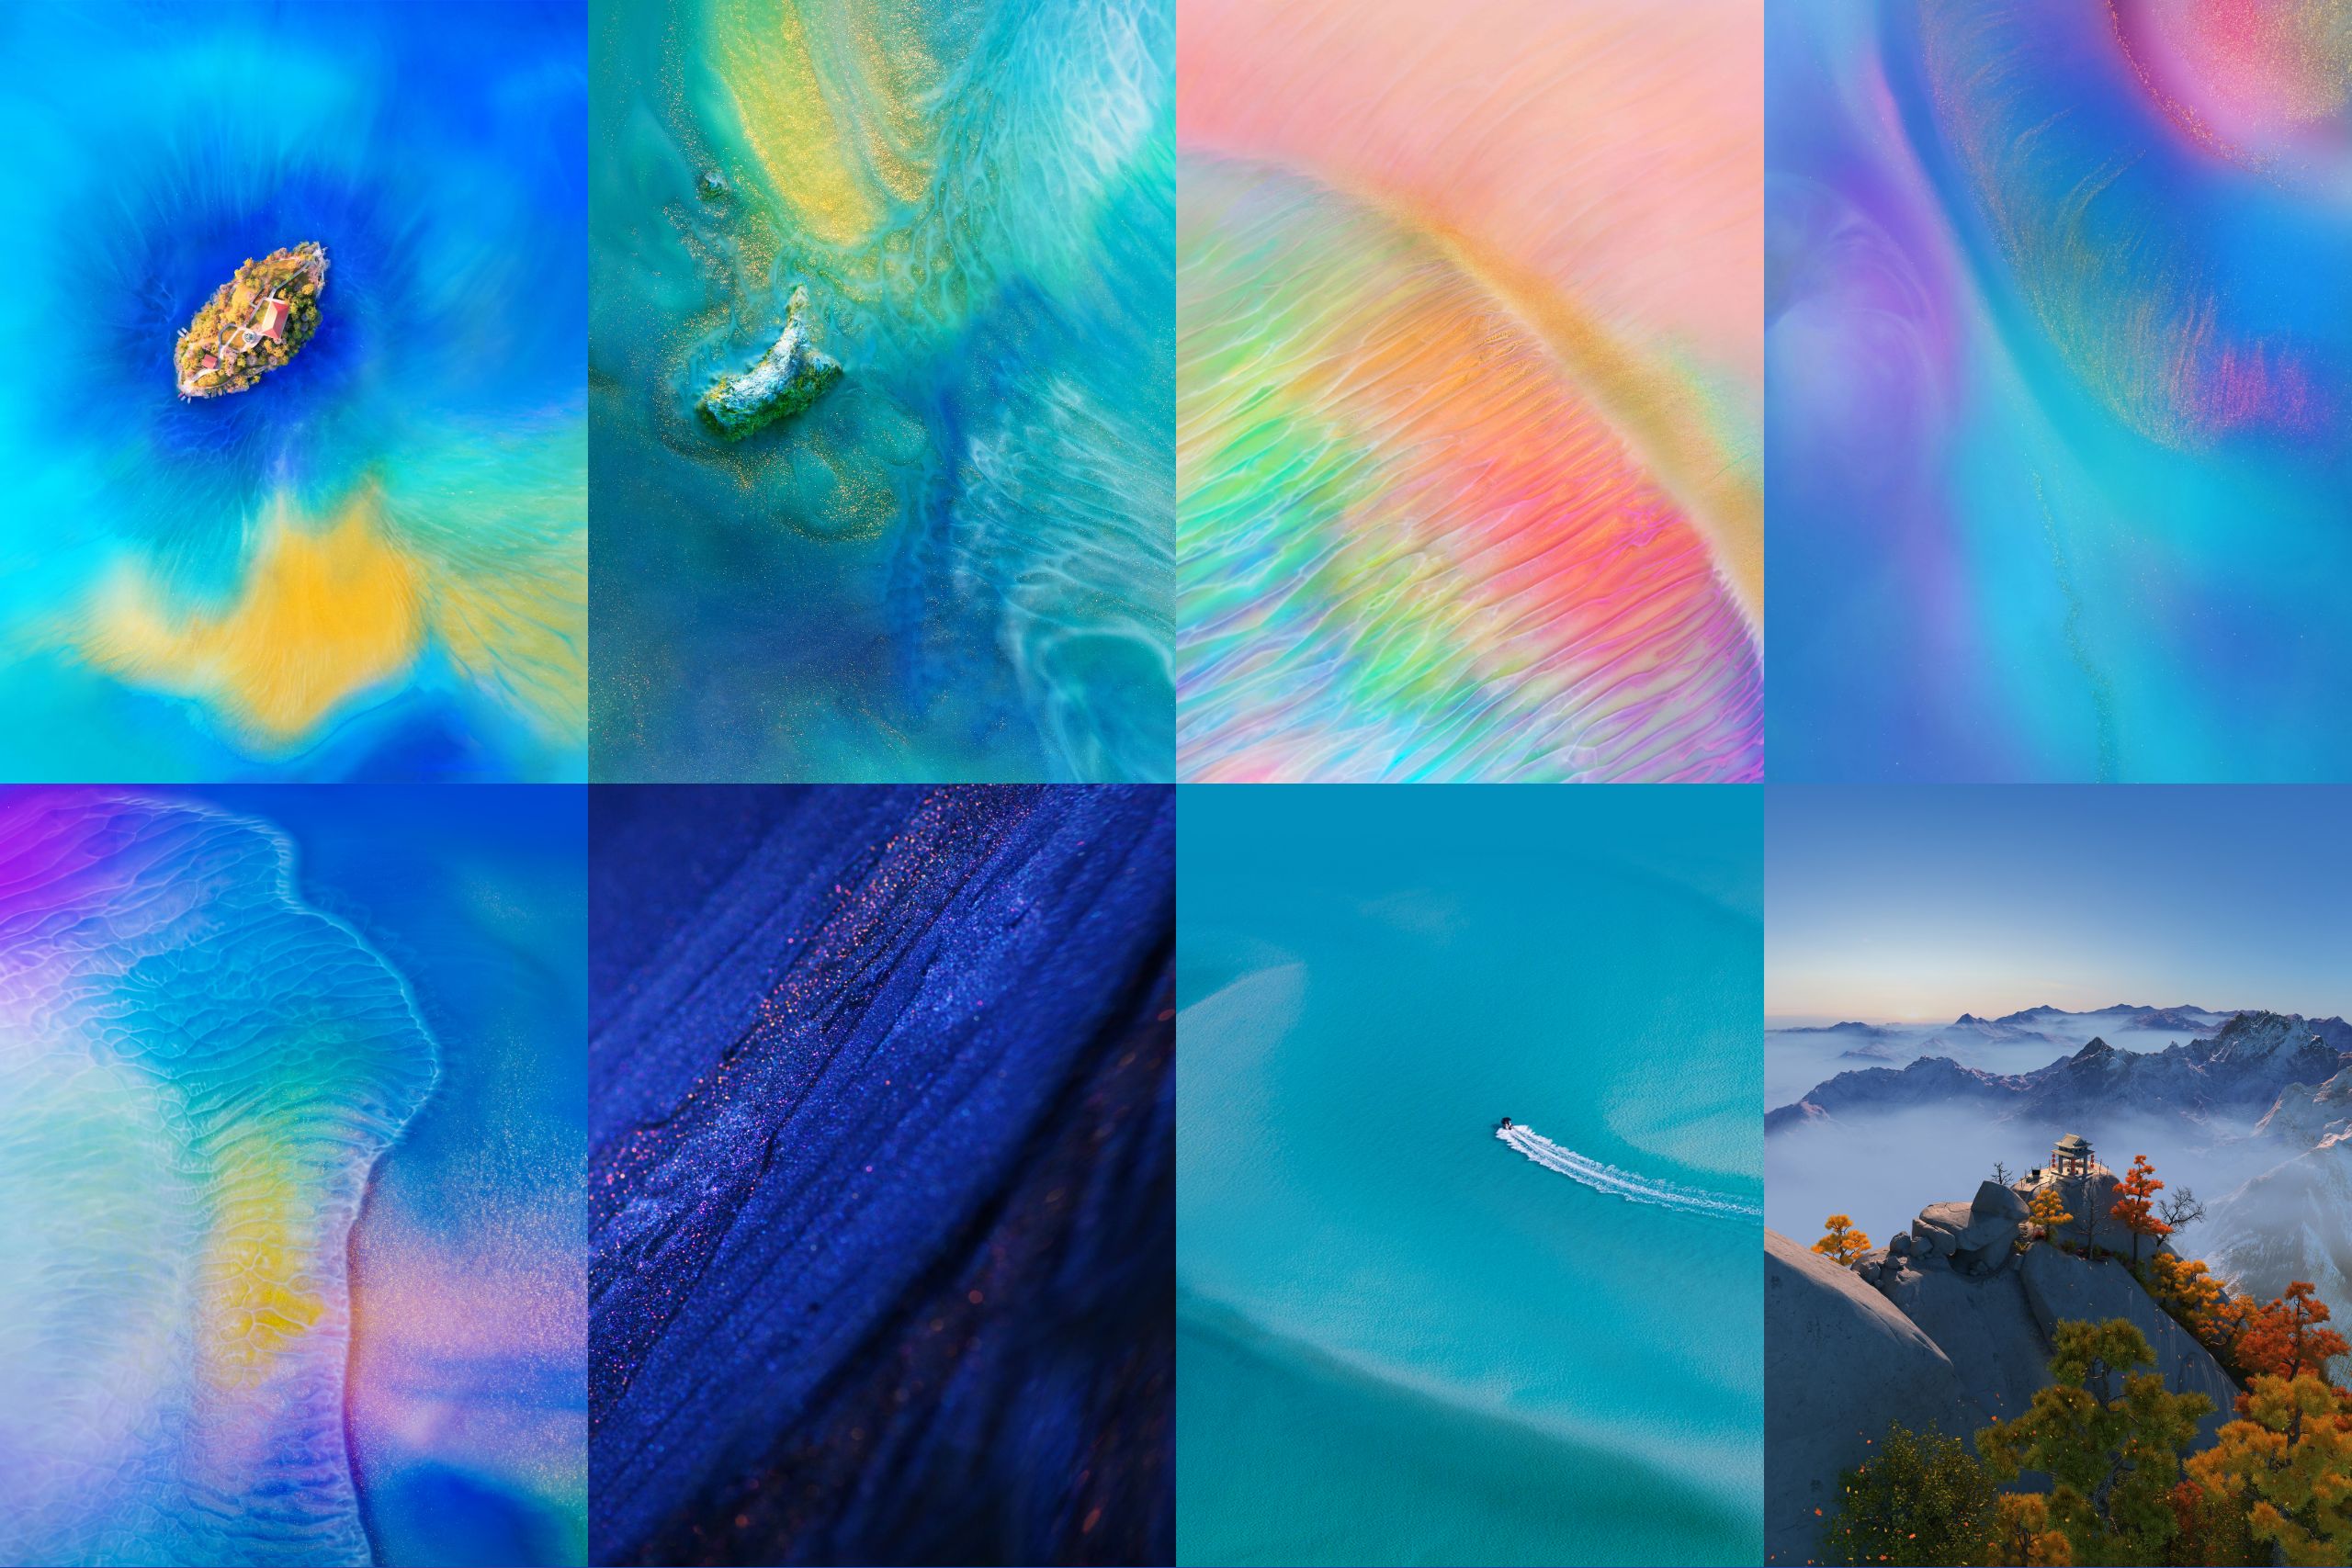 Huawei Mate 20 Pro Features and Stock Wallpaper Download boomtechin